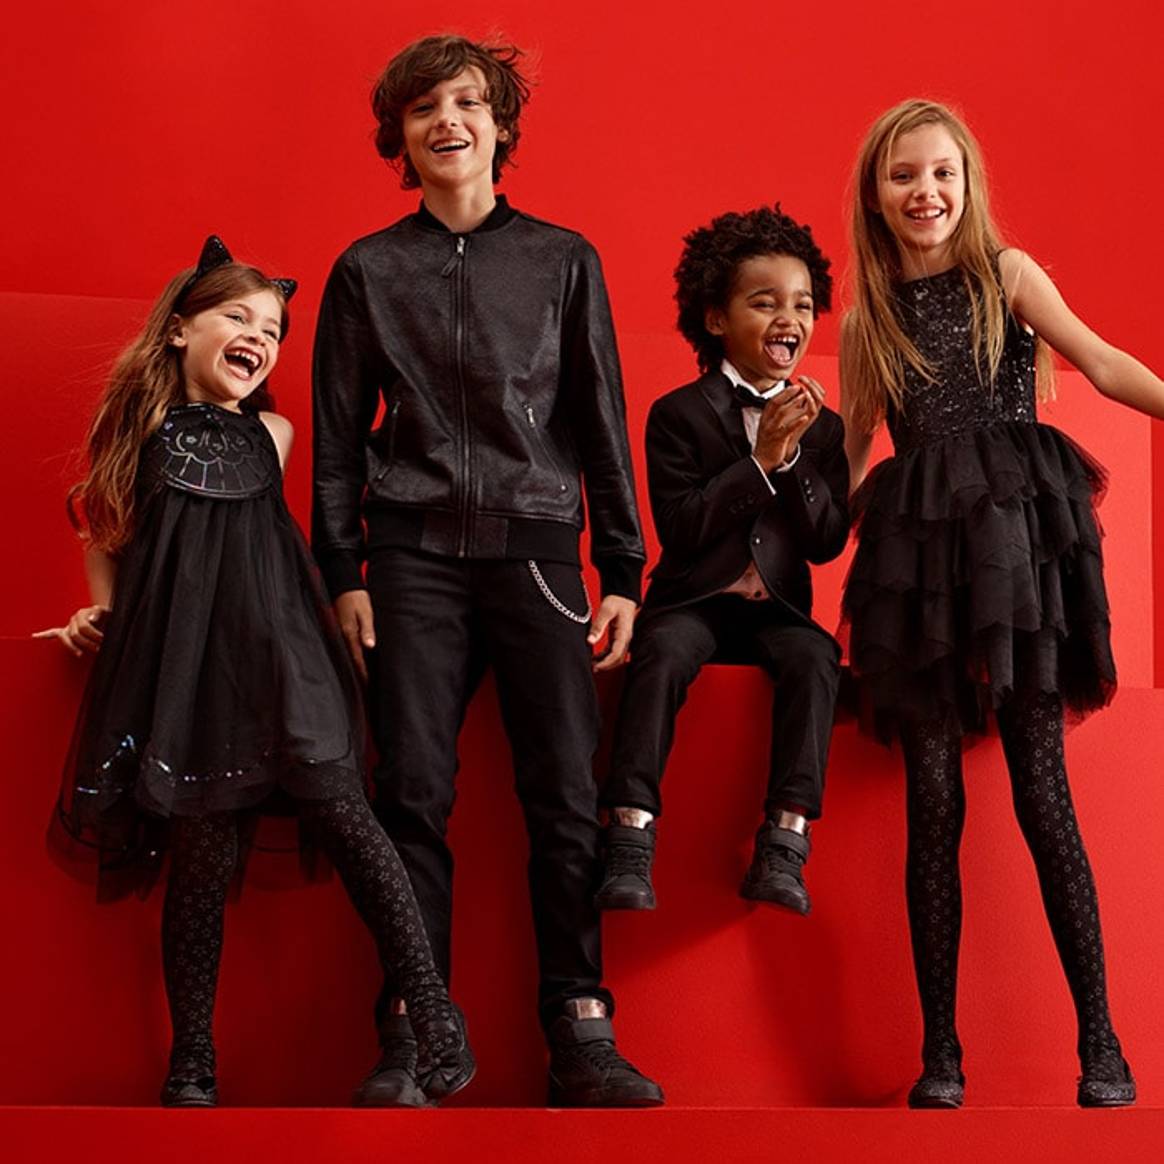 H&M US to launch debut 'All Black' collection for Black Friday